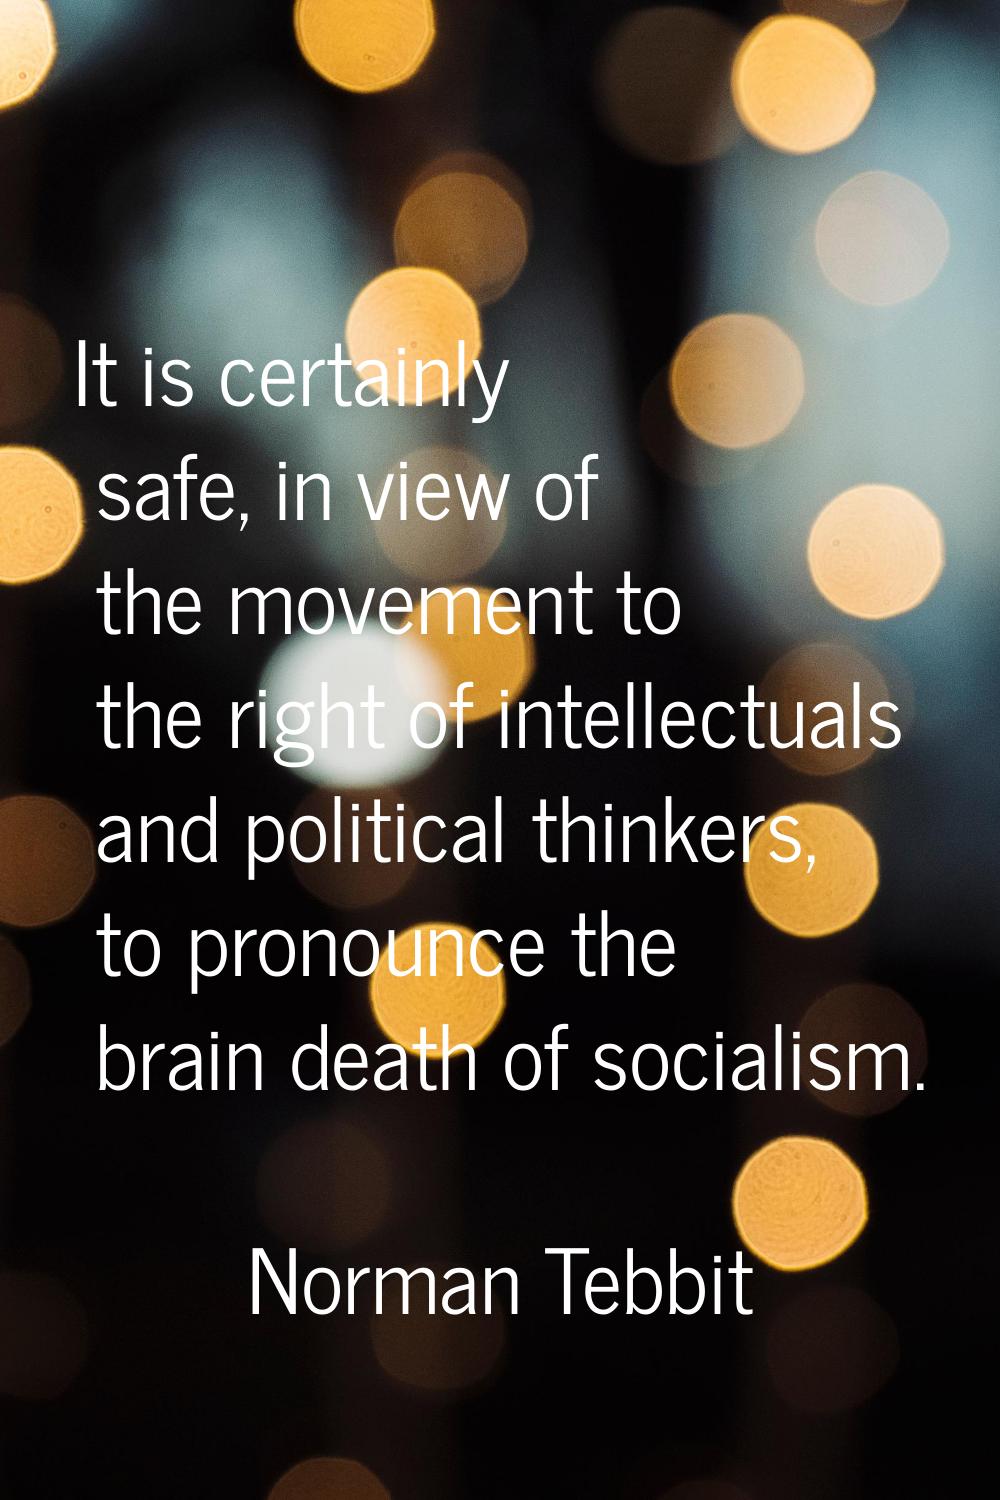 It is certainly safe, in view of the movement to the right of intellectuals and political thinkers,